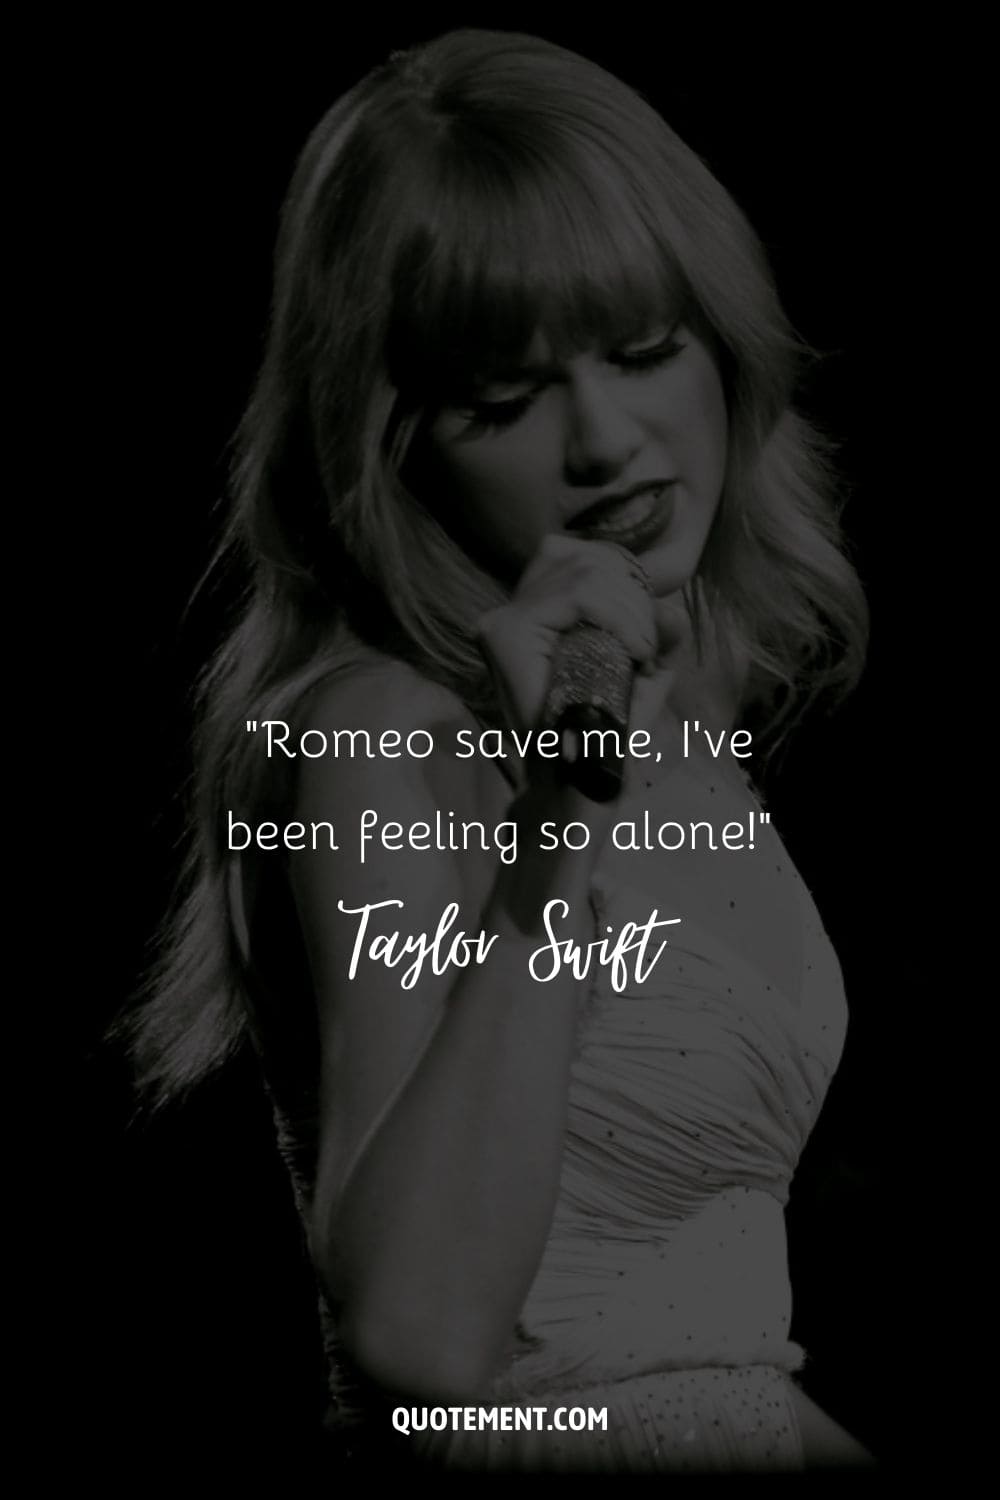 “Romeo save me, I've been feeling so alone!” ― Taylor Swift